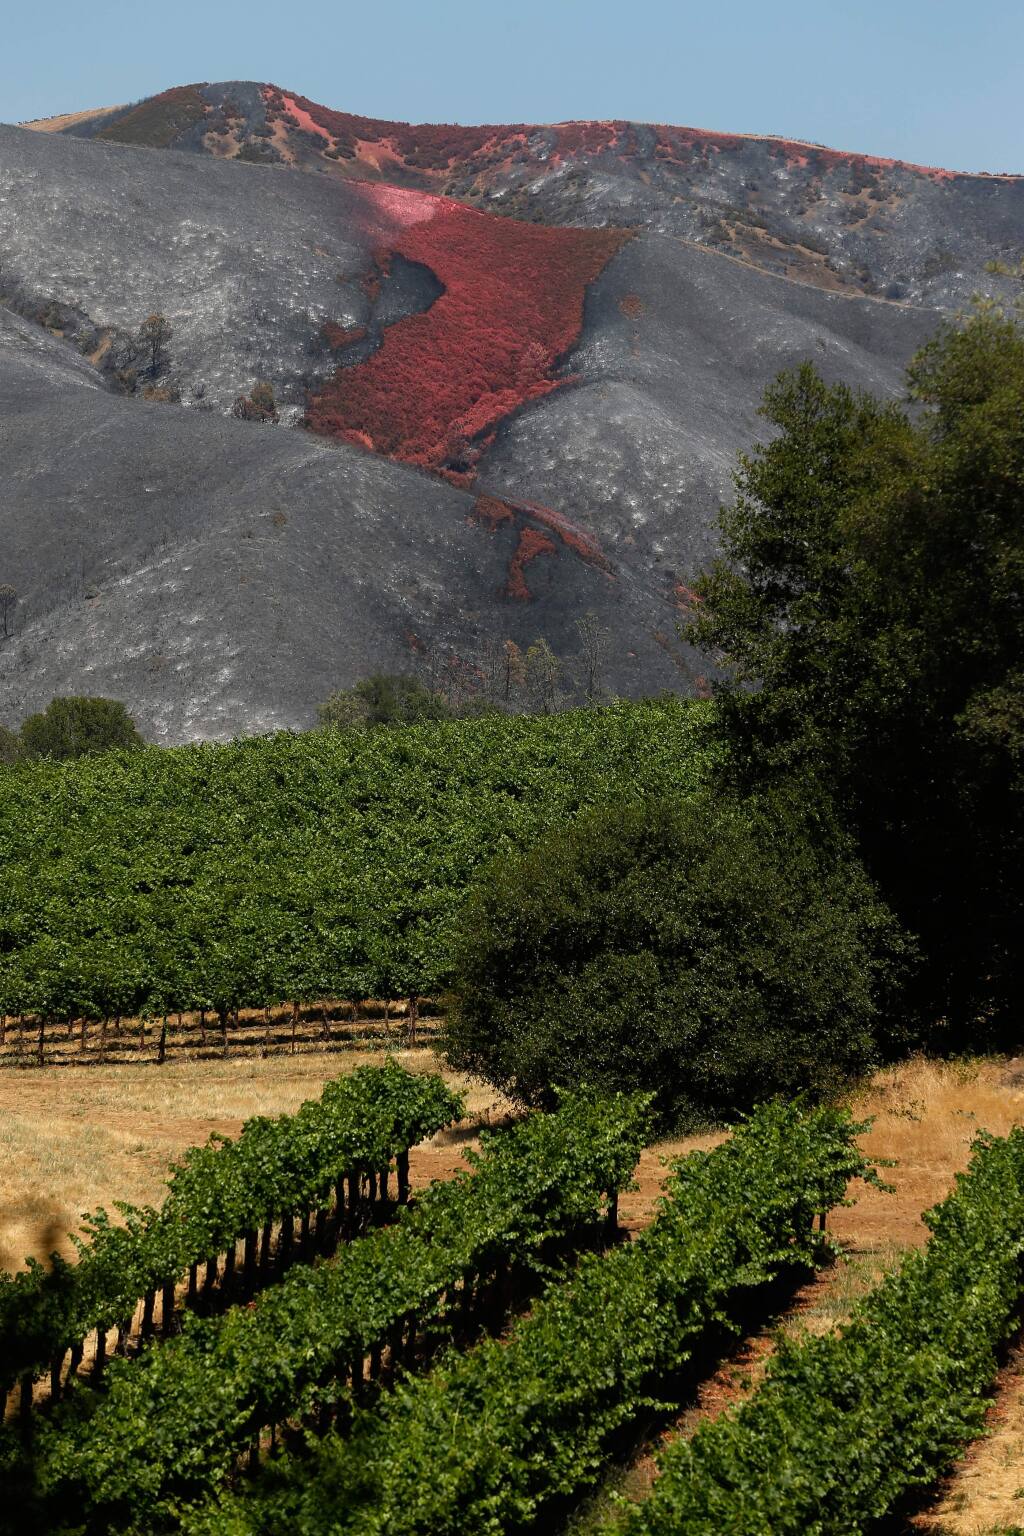 A red layer of Phos-Chek fire retardant is seen covering part of a burned hillside near Clearlake Oaks, California, on Wednesday, June 27, 2018. (Alvin Jornada / The Press Democrat)